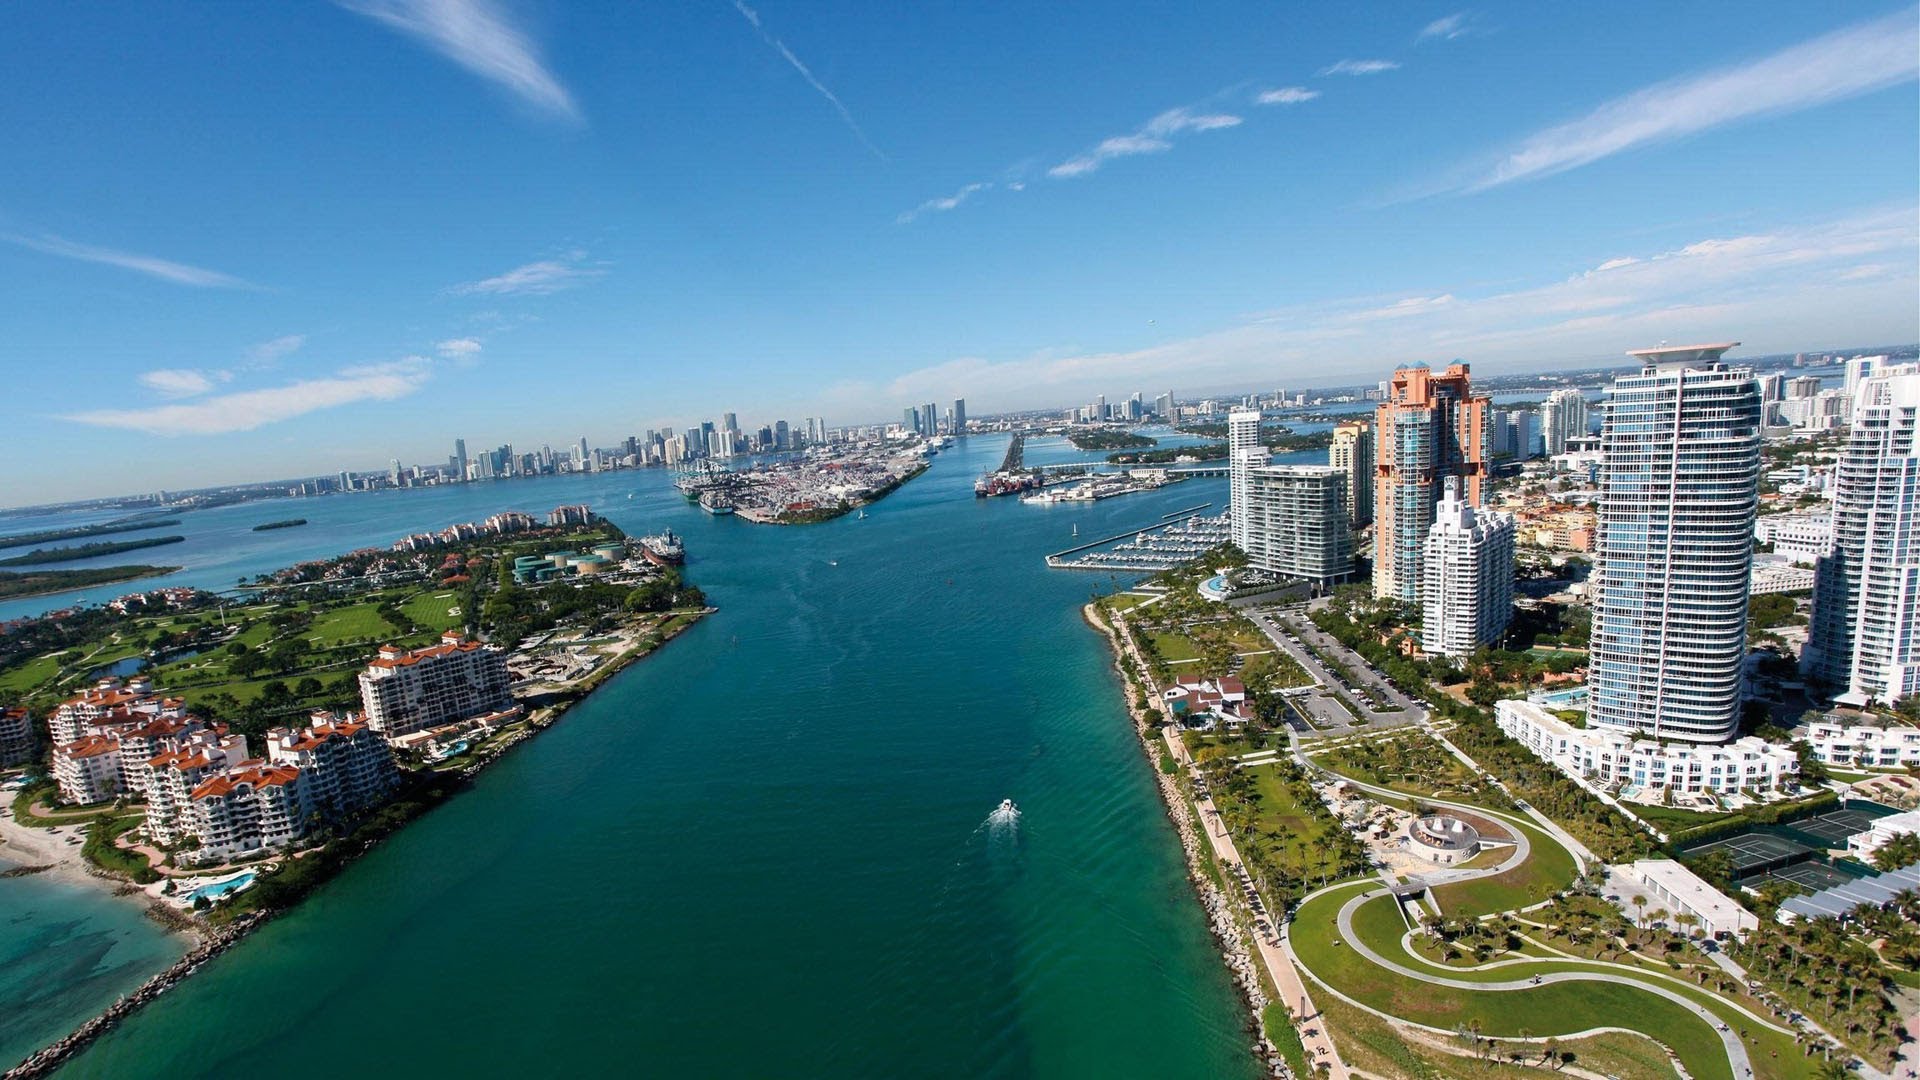 Miami, Florida Travel Guide - Must-See Attractions - YouTube